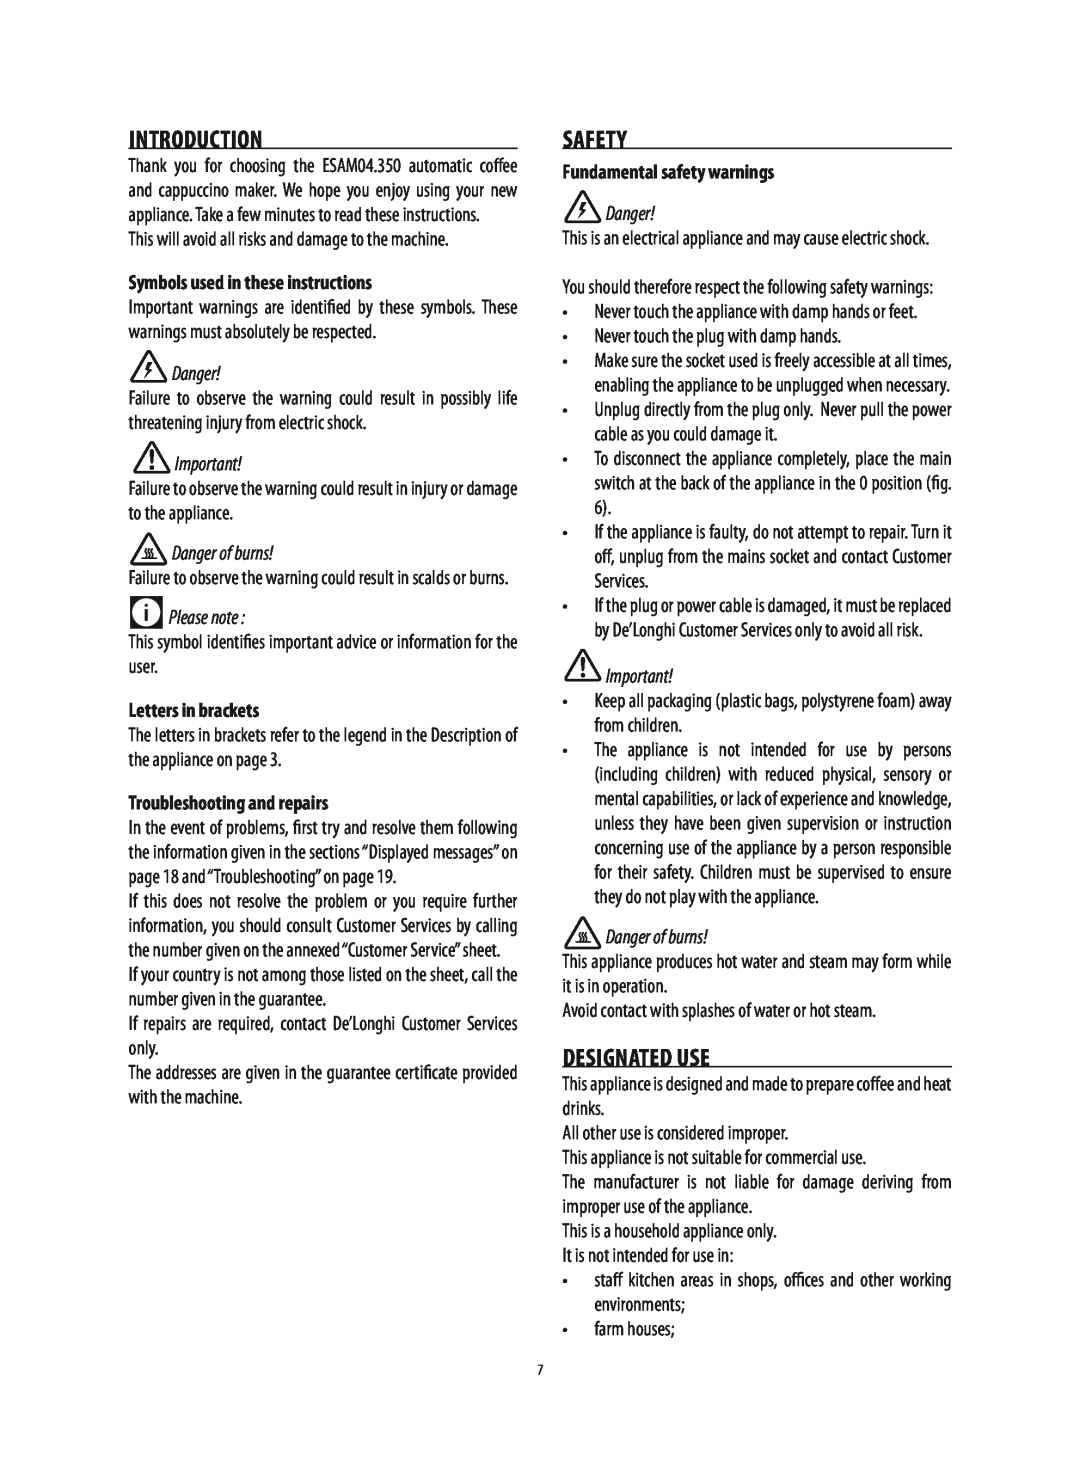 DeLonghi ESAM04.350 manual Introduction, Safety, Designated Use, Symbols used in these instructions, Danger of burns 